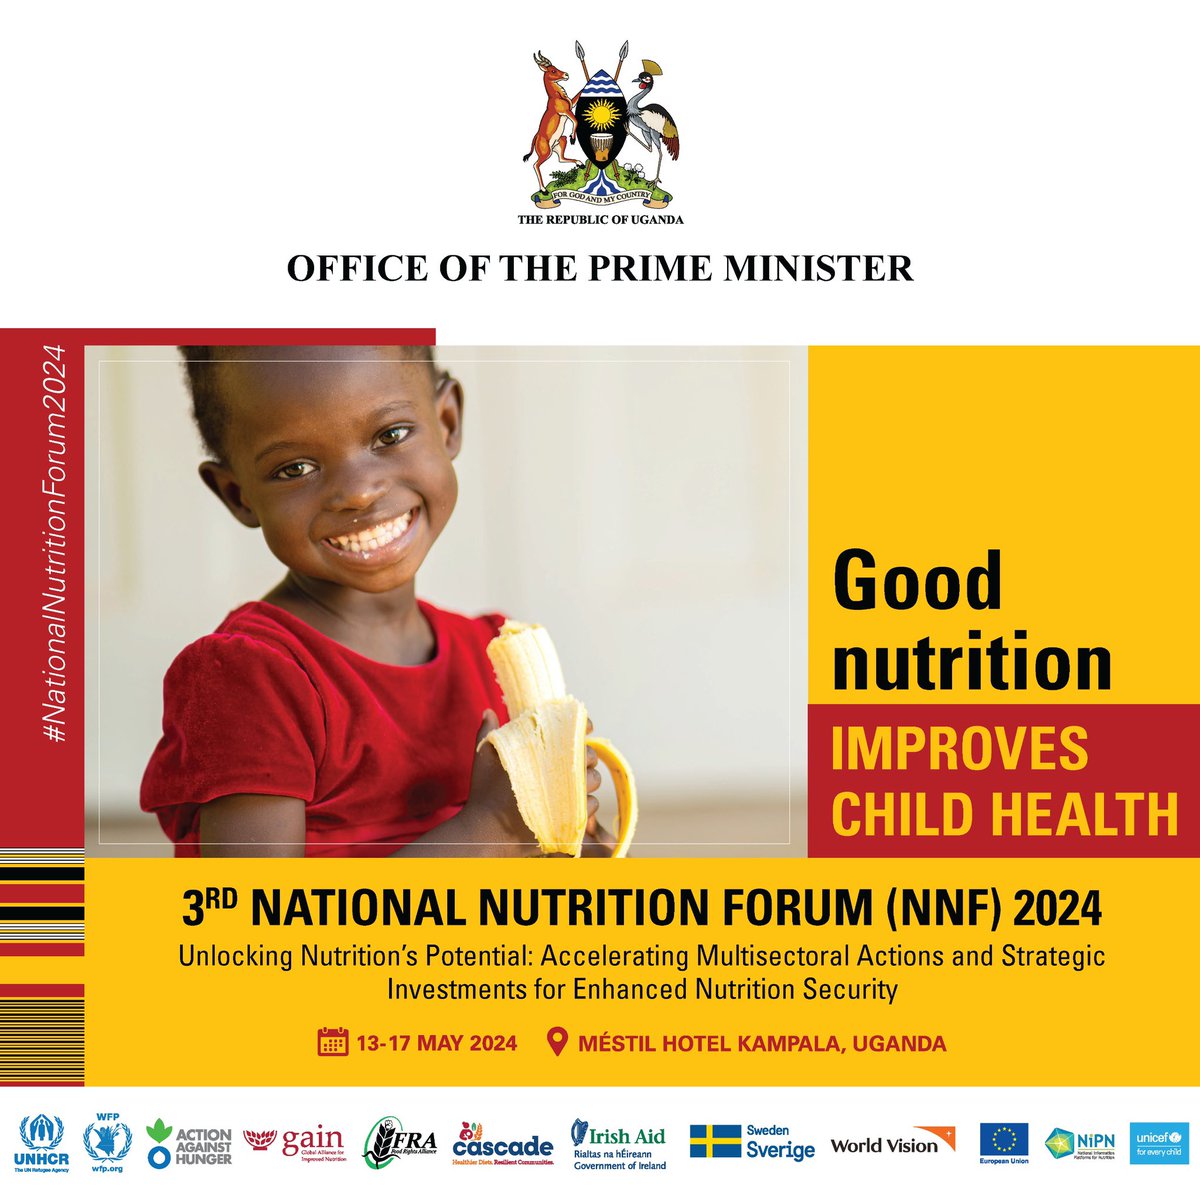 Get excited for the 3rd National Nutrition Forum (NNF) 2024 which will be happening from 13th - 17th May,2024. THEME: UNLOCKING NUTRITION’S POTENTIAL: Accelerating Multisectoral Actions and Strategic Investments for Enhanced Nutrition Security. #NationalNutritionForum2024